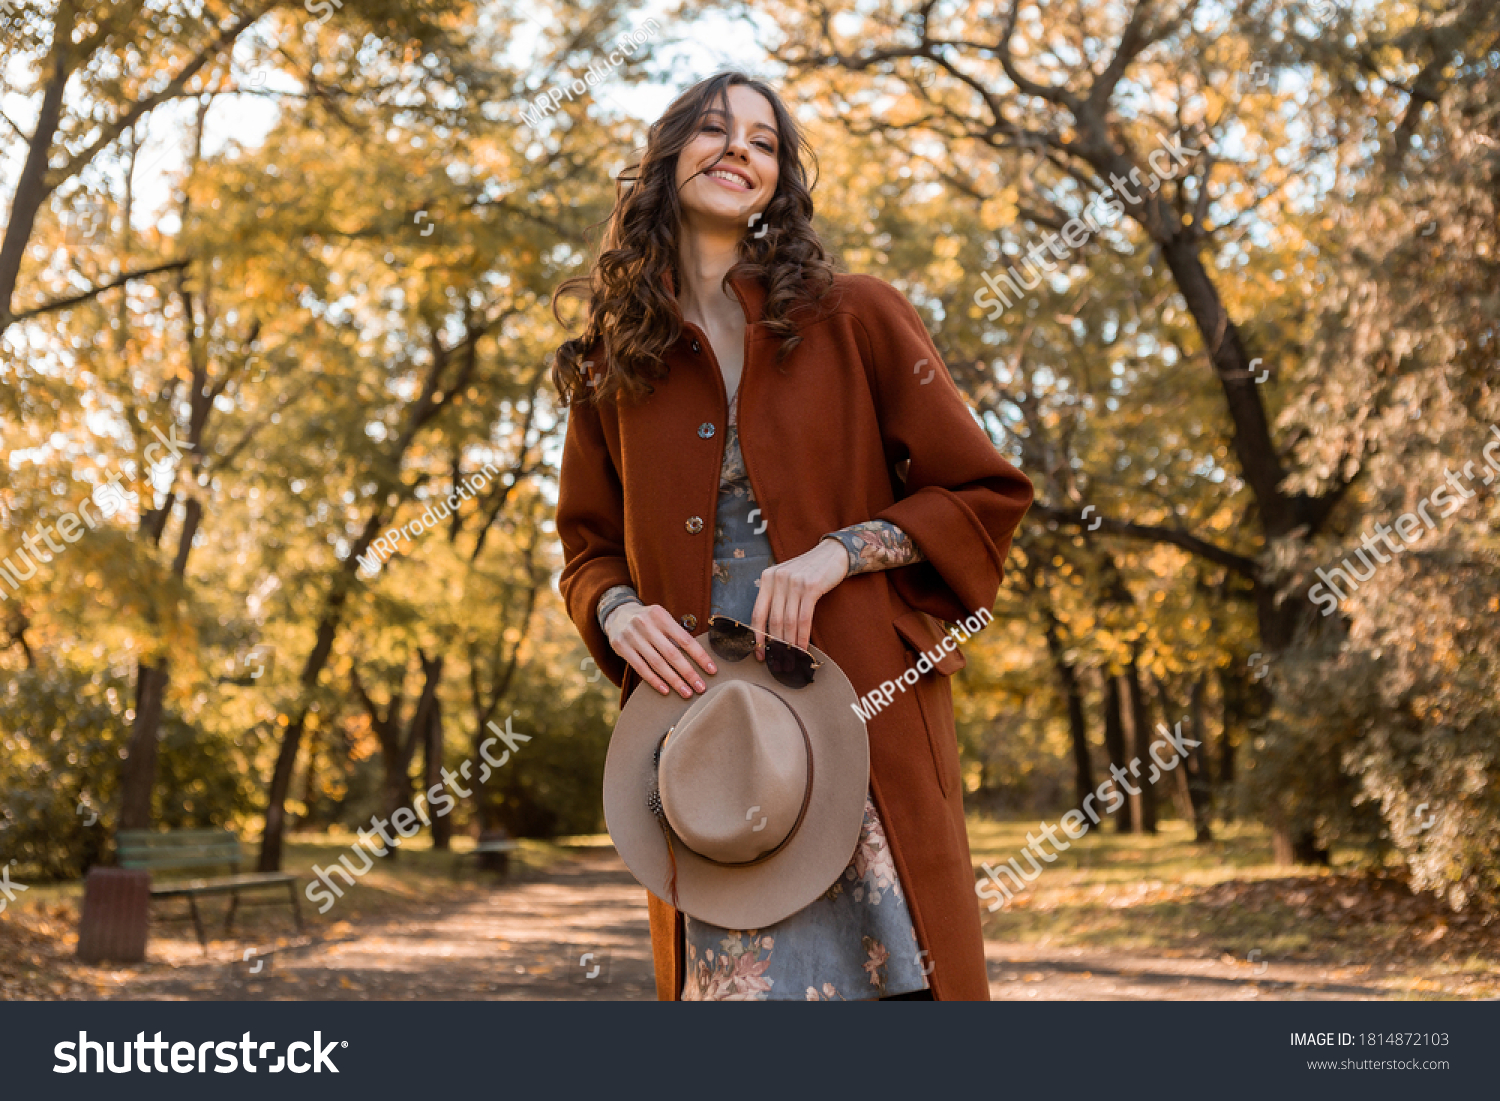 close-up hands details of attractive stylish woman holding hat and sunglasses walking in park dressed in warm coat autumn trendy street fashion style accessories #1814872103